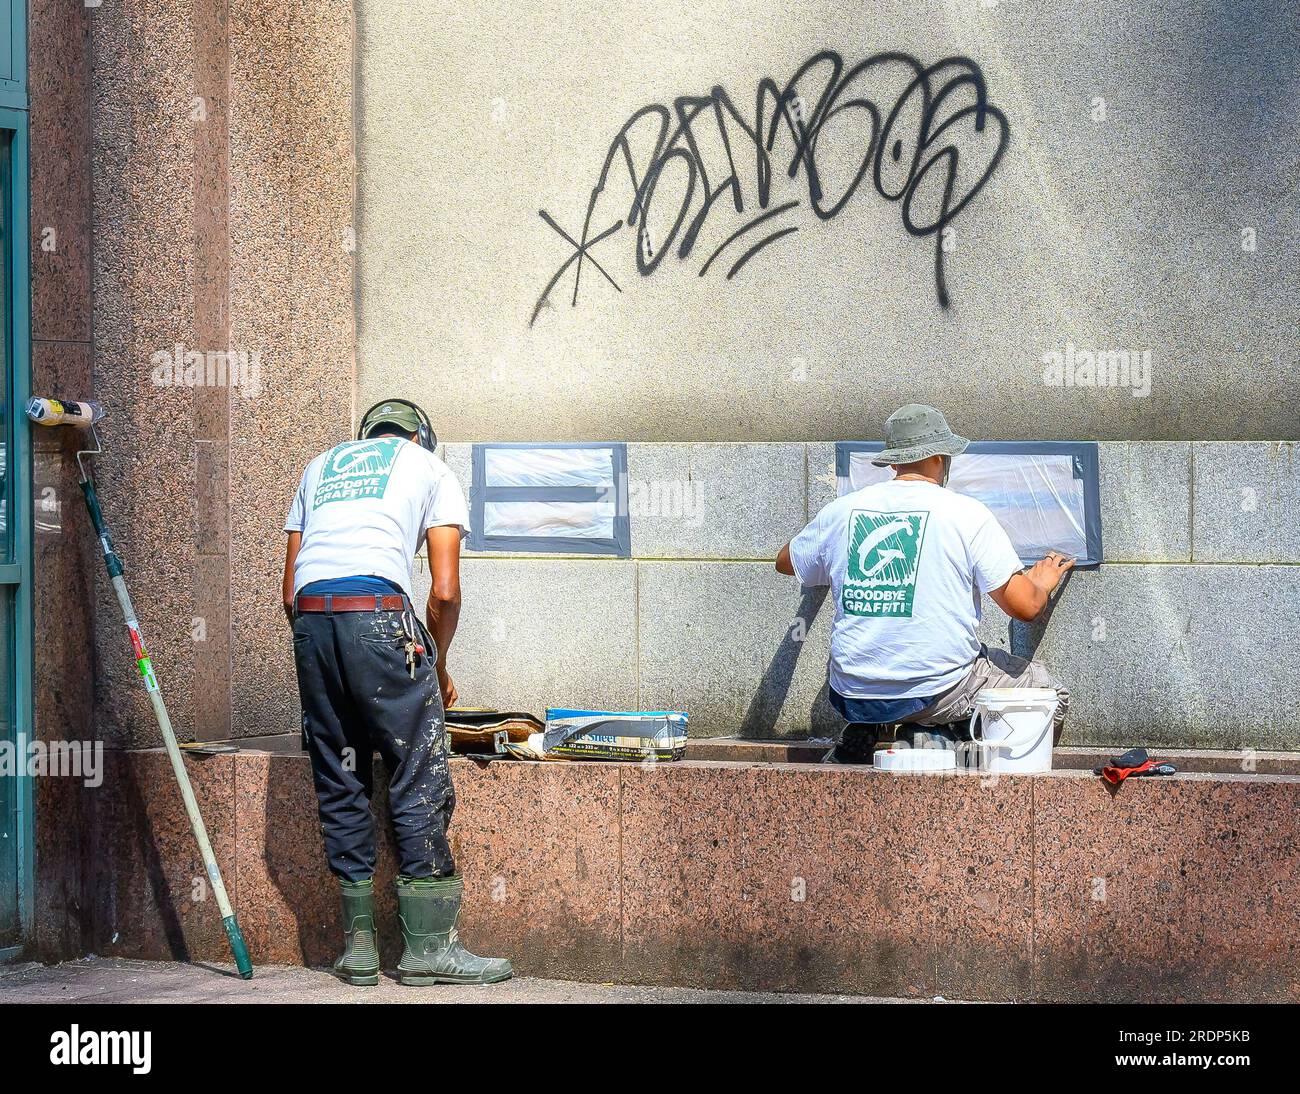 Toronto, Canada - July 19, 2023: Two men work erasing or deleting tagging graffiti from a building exterior wall in the downtwon district. Stock Photo